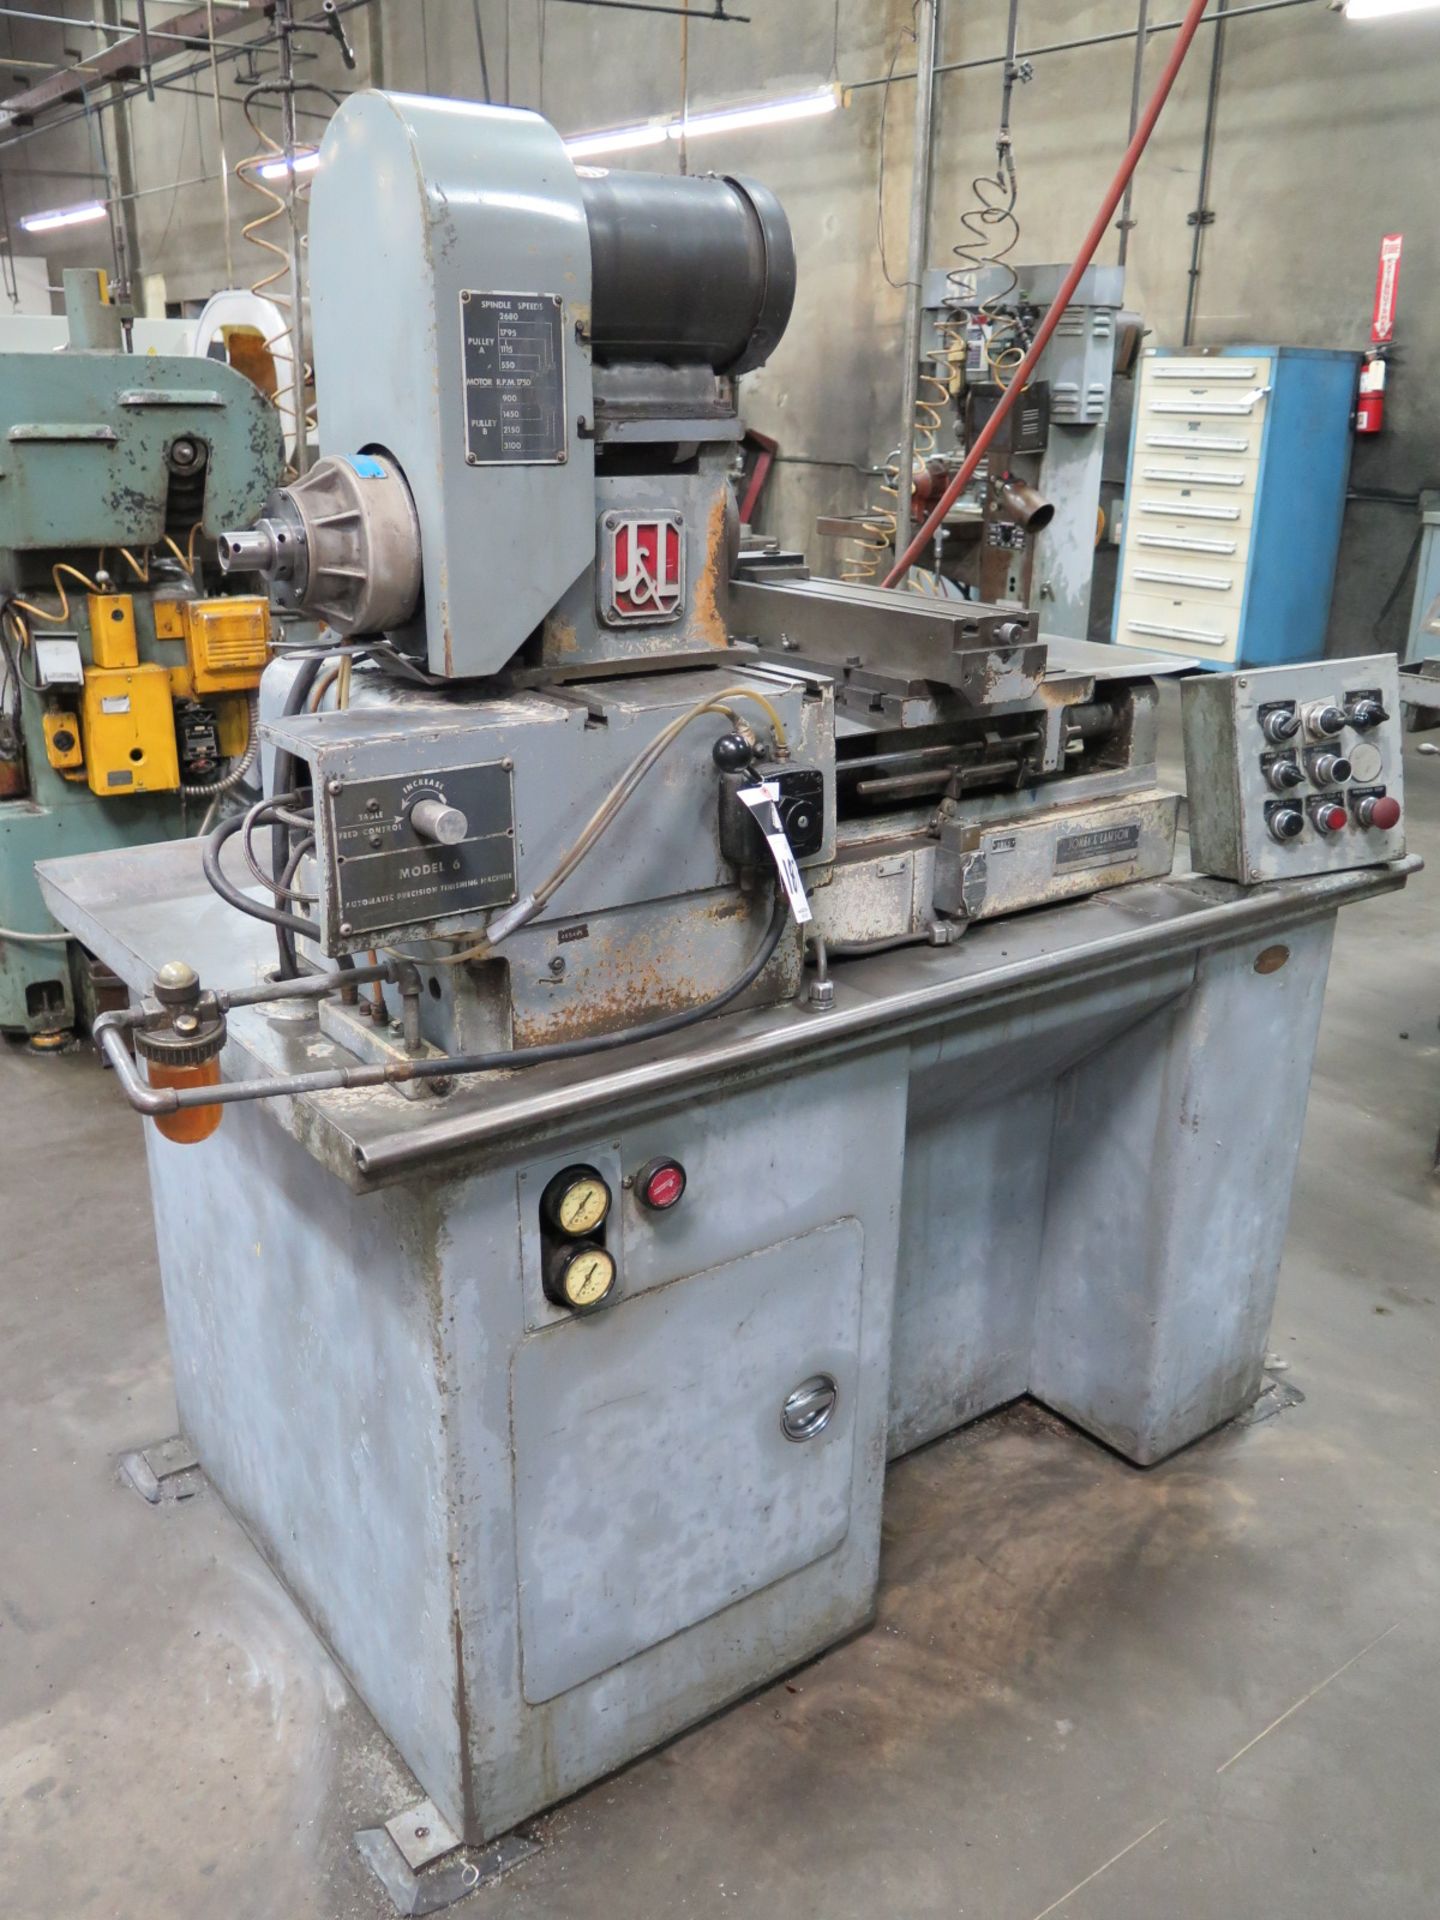 Jones & Lamson mdl. 6 Automatic Finishing Lathe s/n 455401 w/ Auto Cycles, Cross Slide, 5C Collet - Image 2 of 6